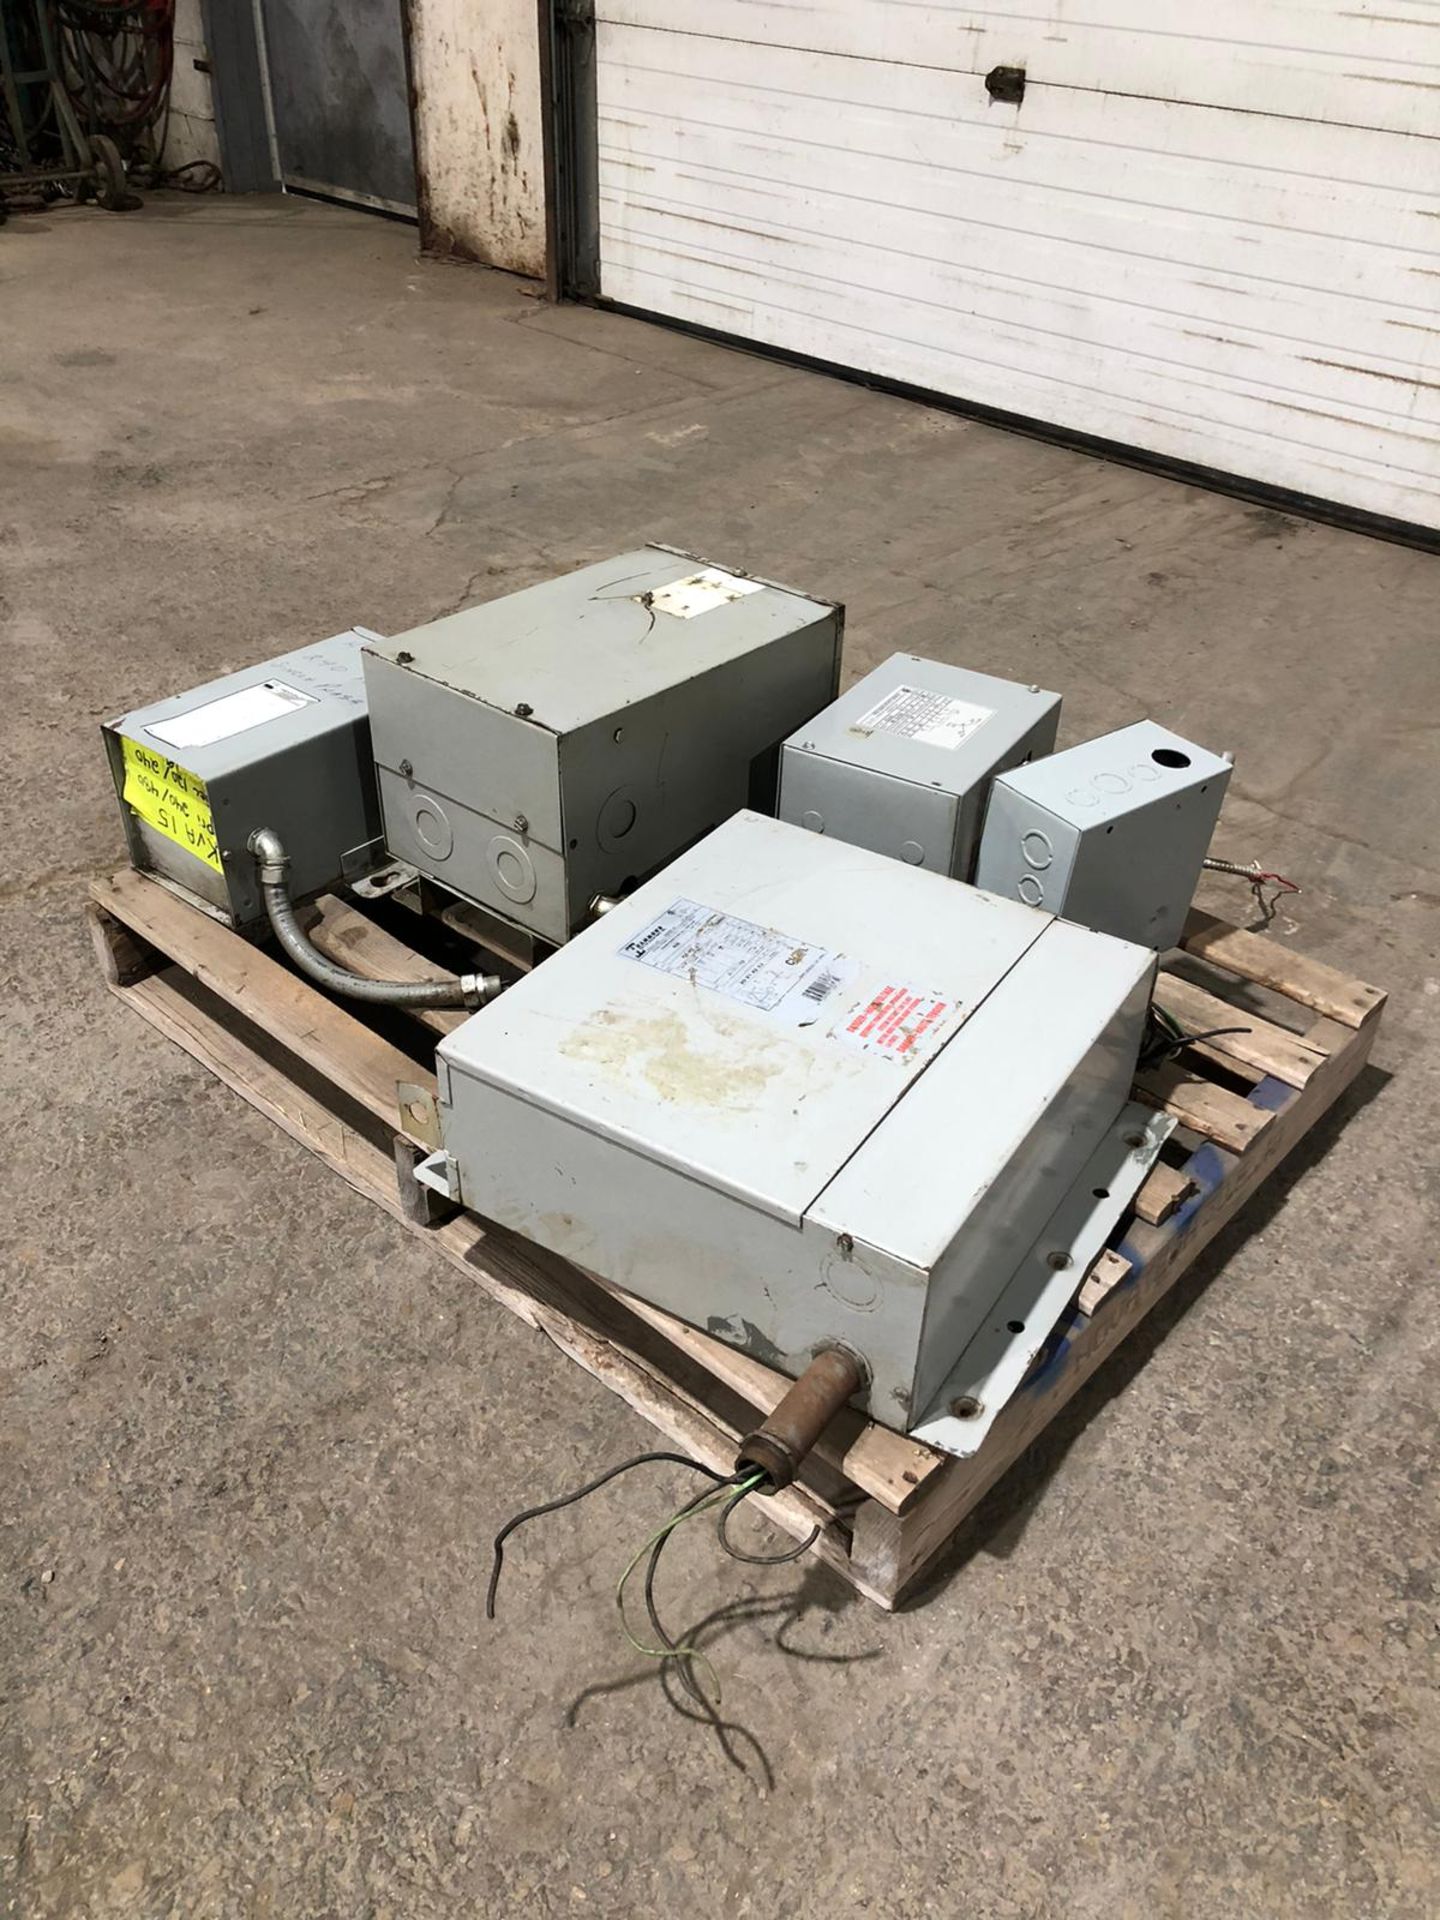 Lot of 5 (5 units) Electrical Transformers 1.5 to 5KVA units - Image 2 of 4